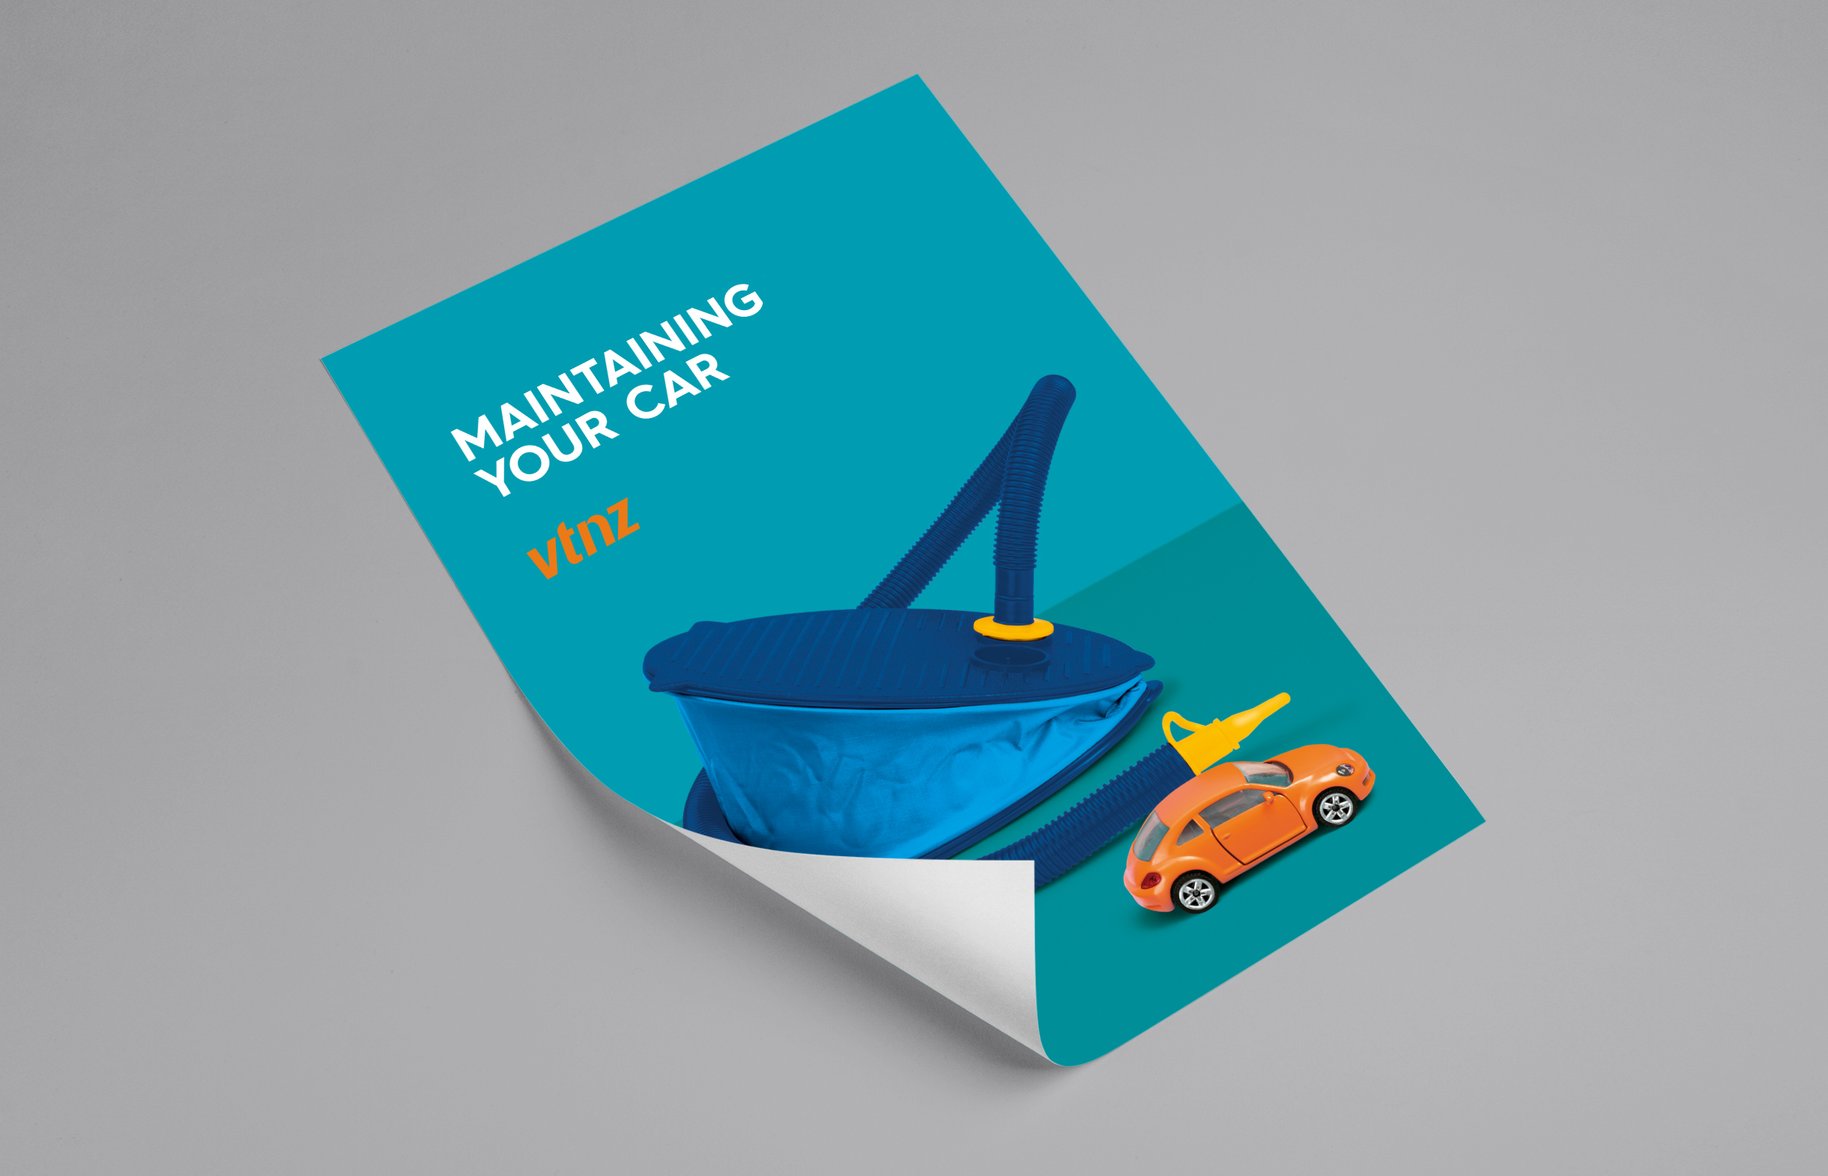 VTNZ 'Maintaining your car' Poster